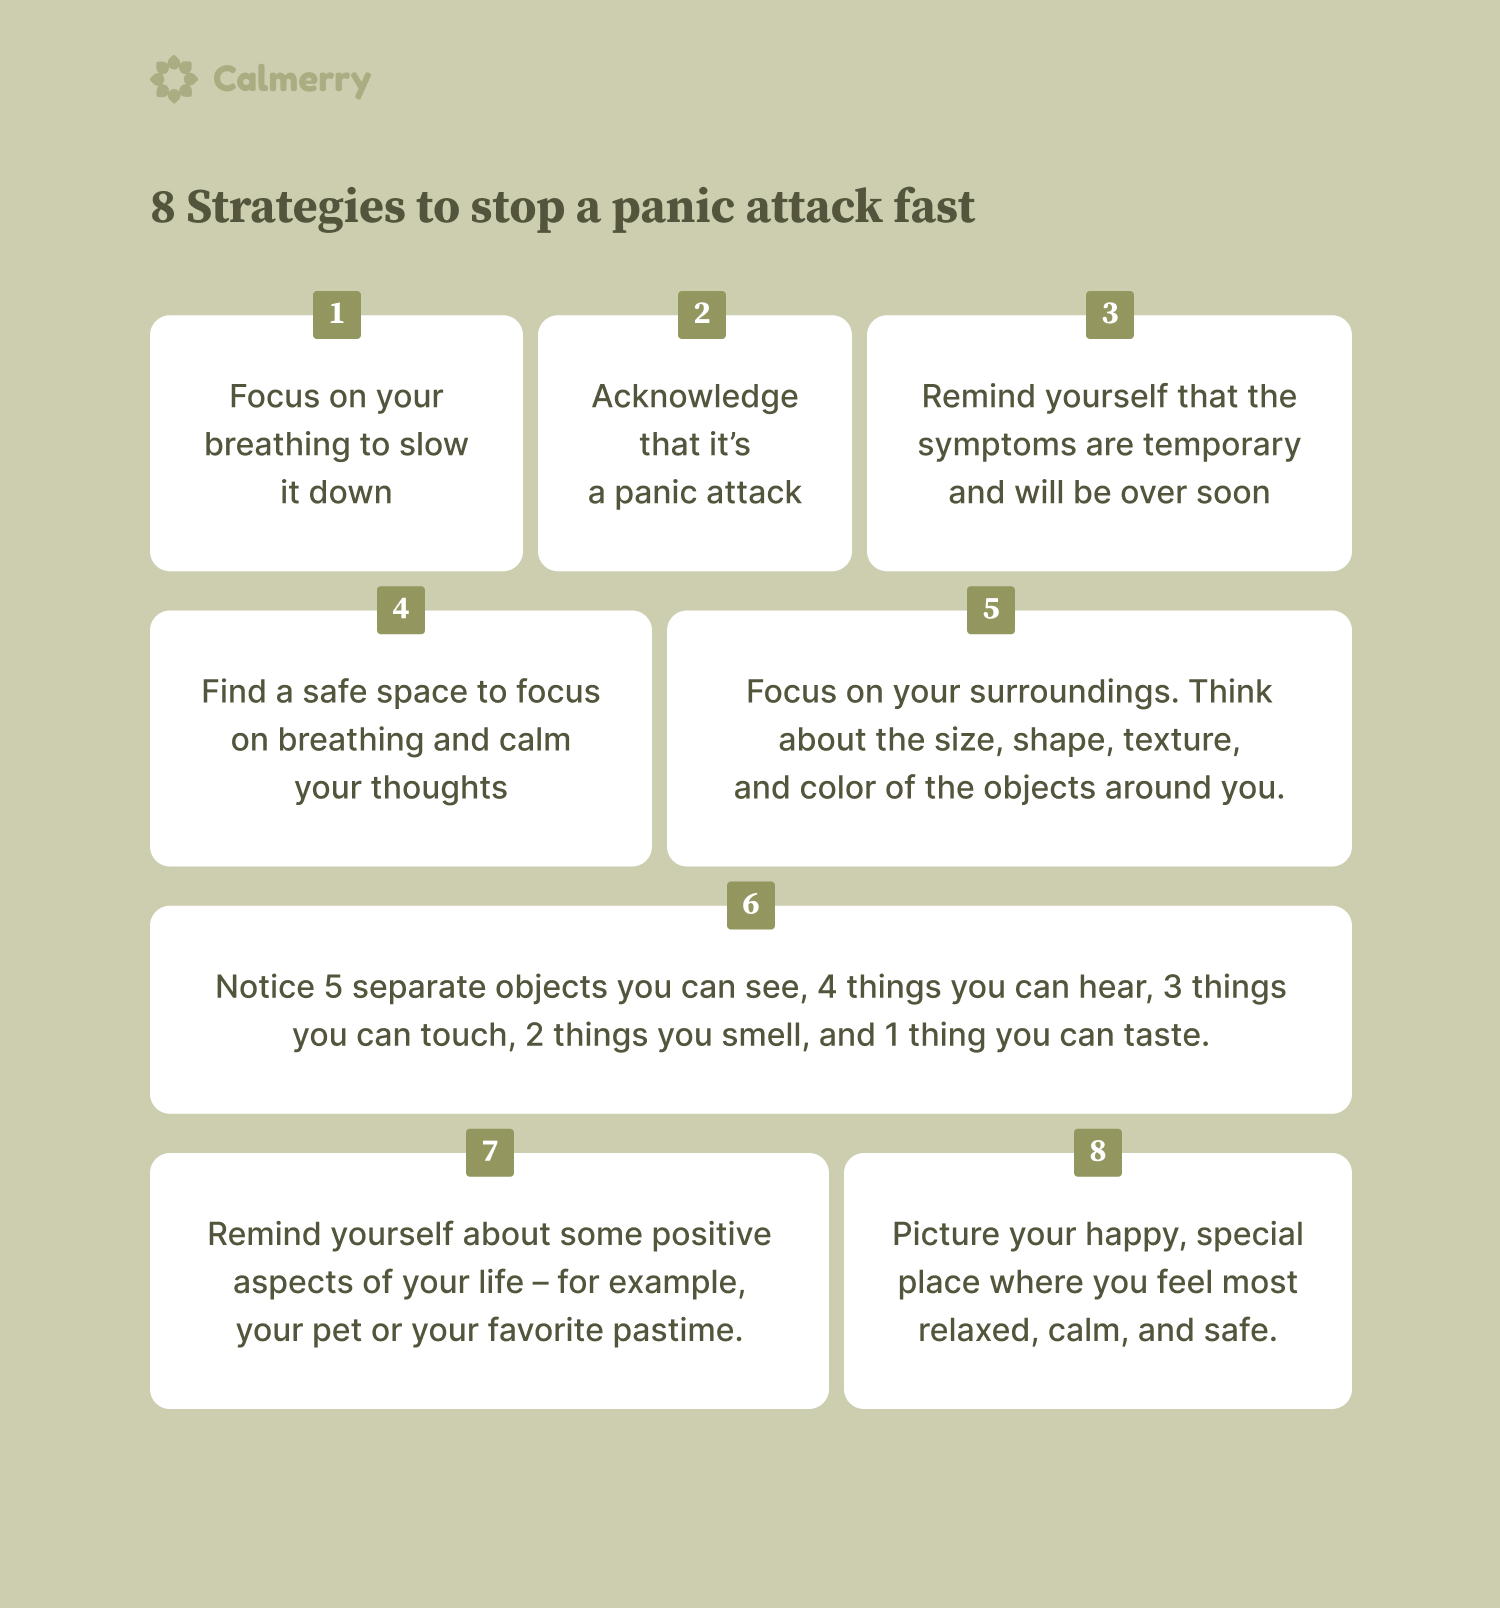 How to stop a panic attack fast – 8 strategies for helping to calm down from a panic attack